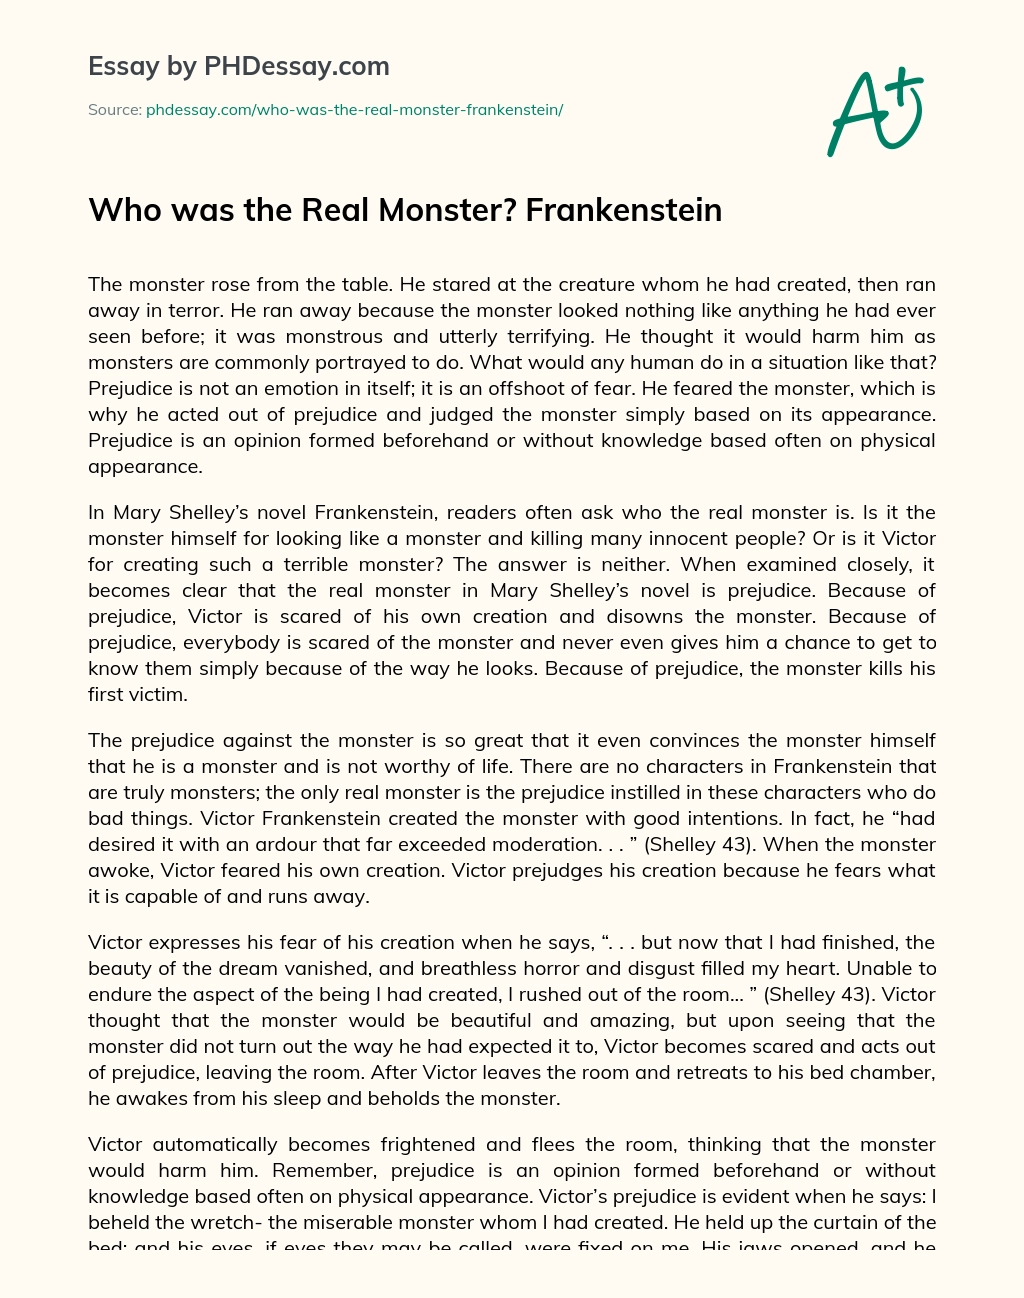 Who was the Real Monster? Frankenstein essay